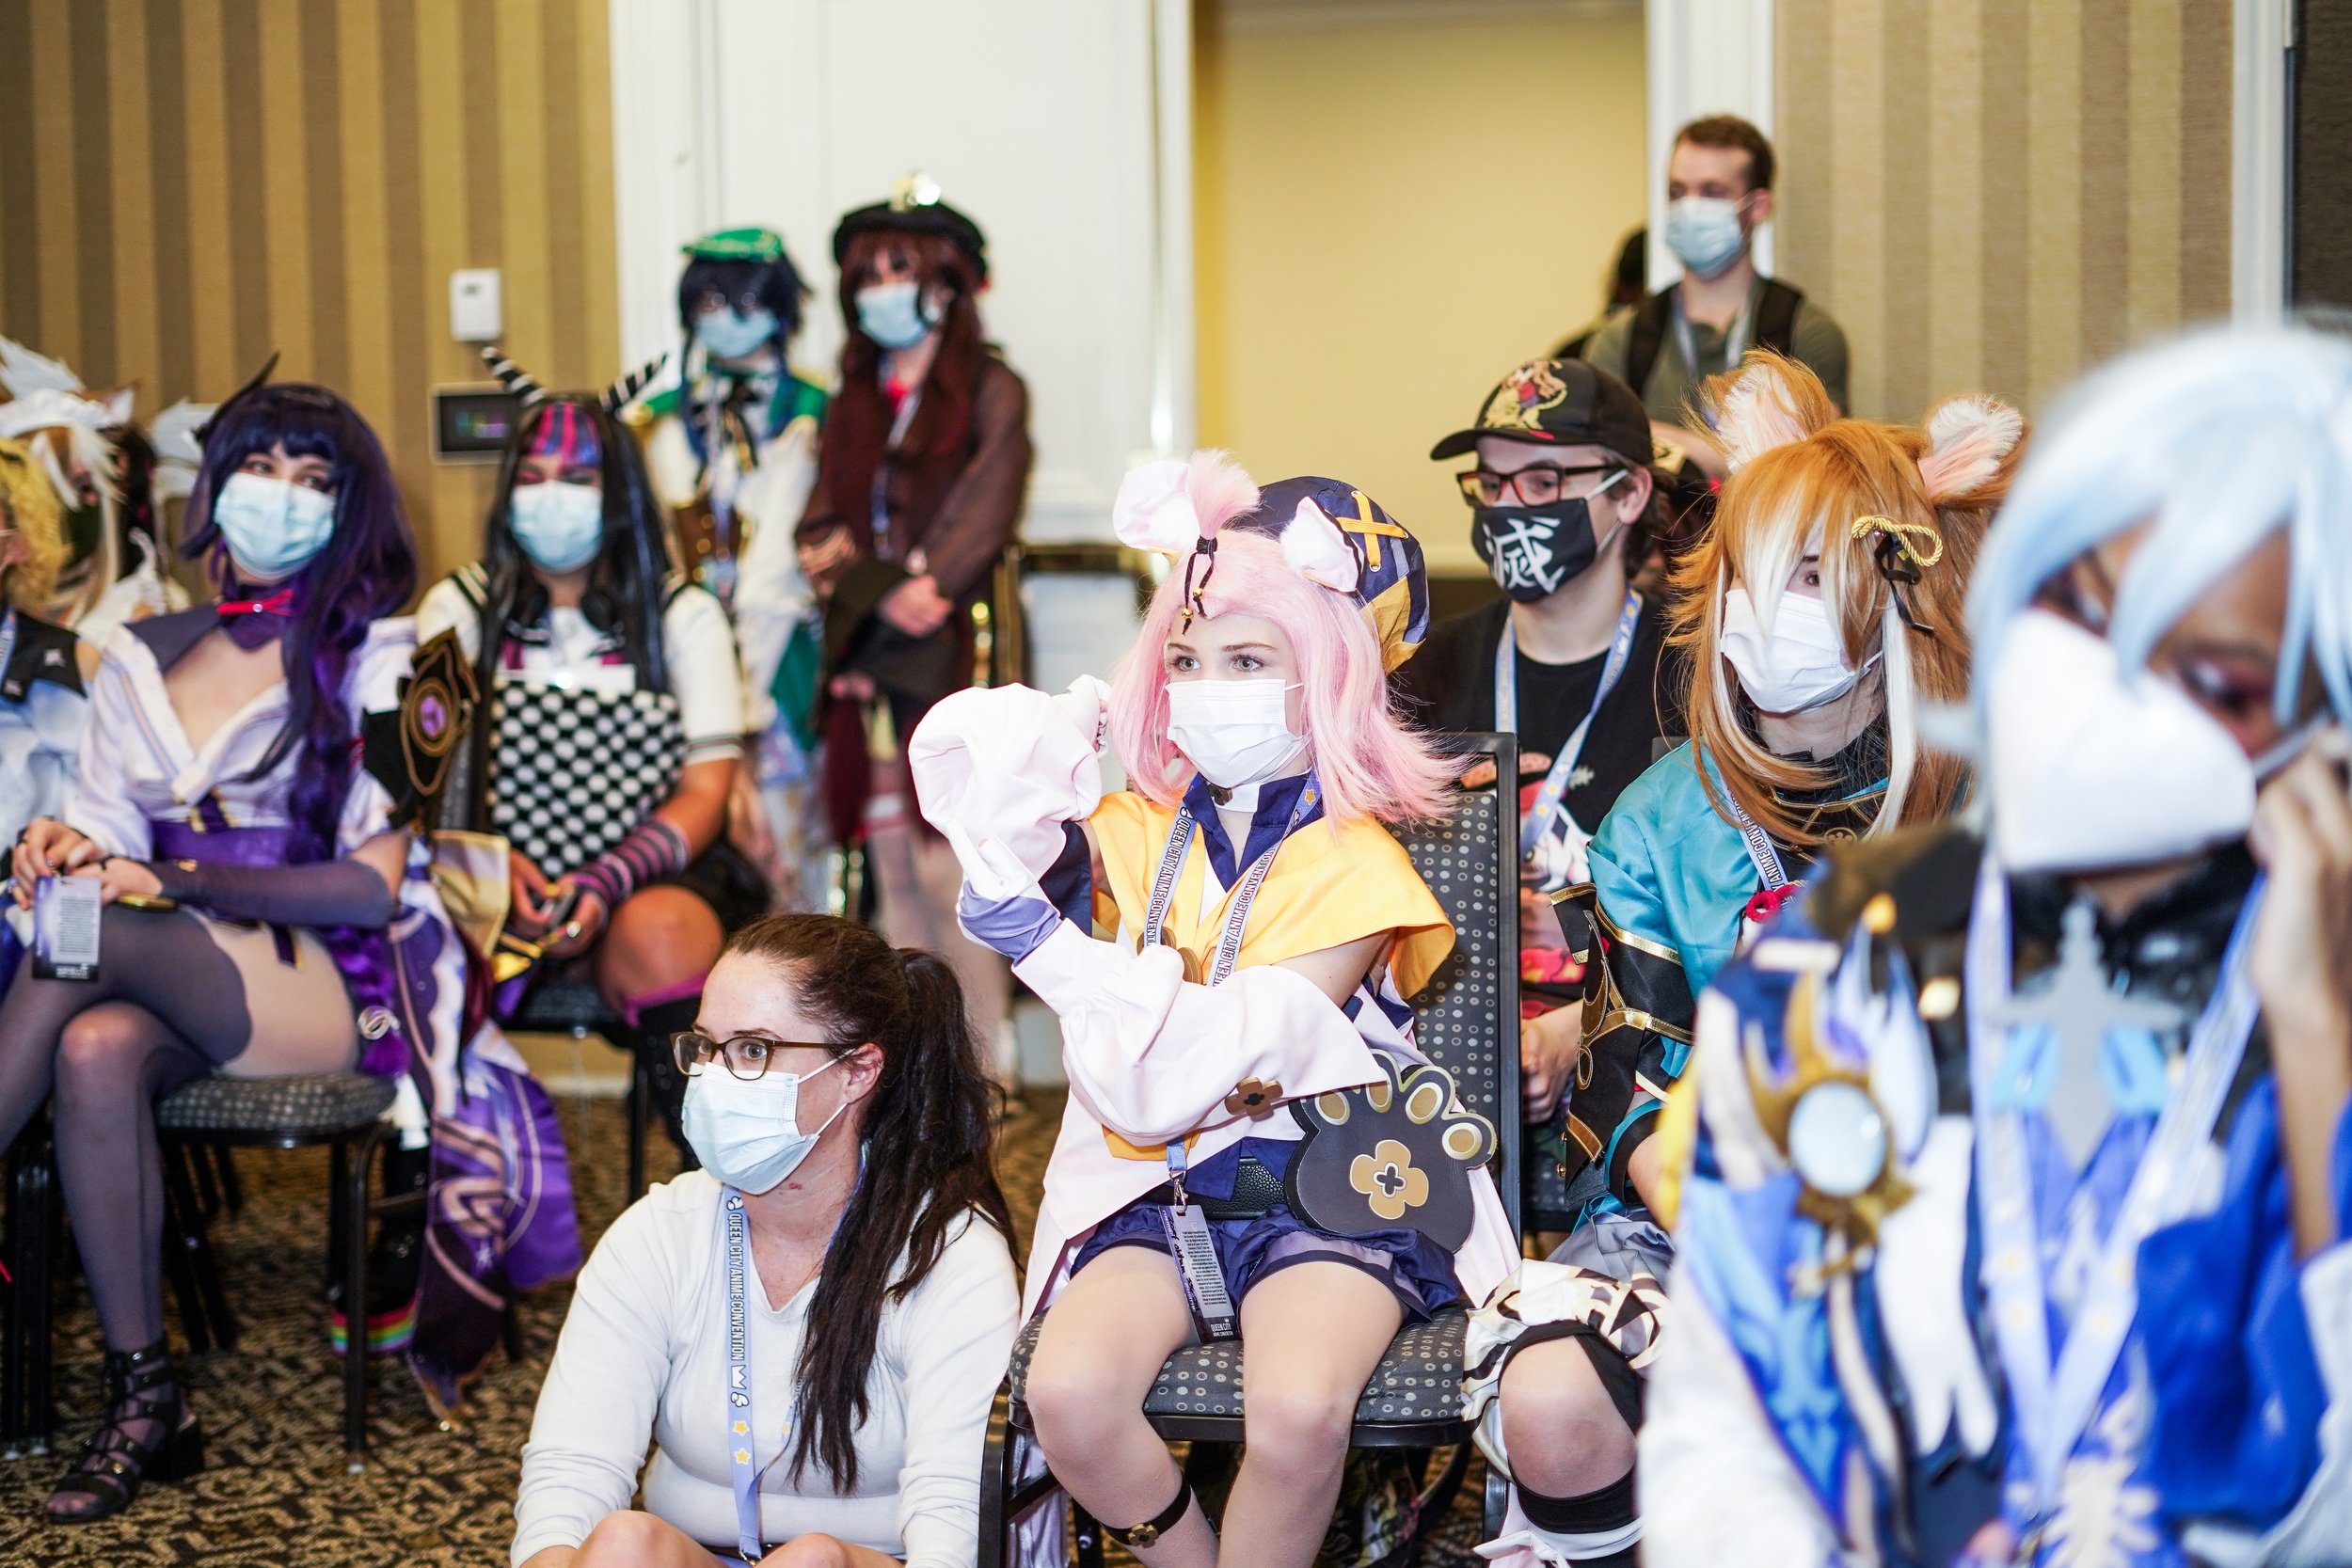 Mountain Nerd Culture Converges On Asheville For Regional Anime Convention